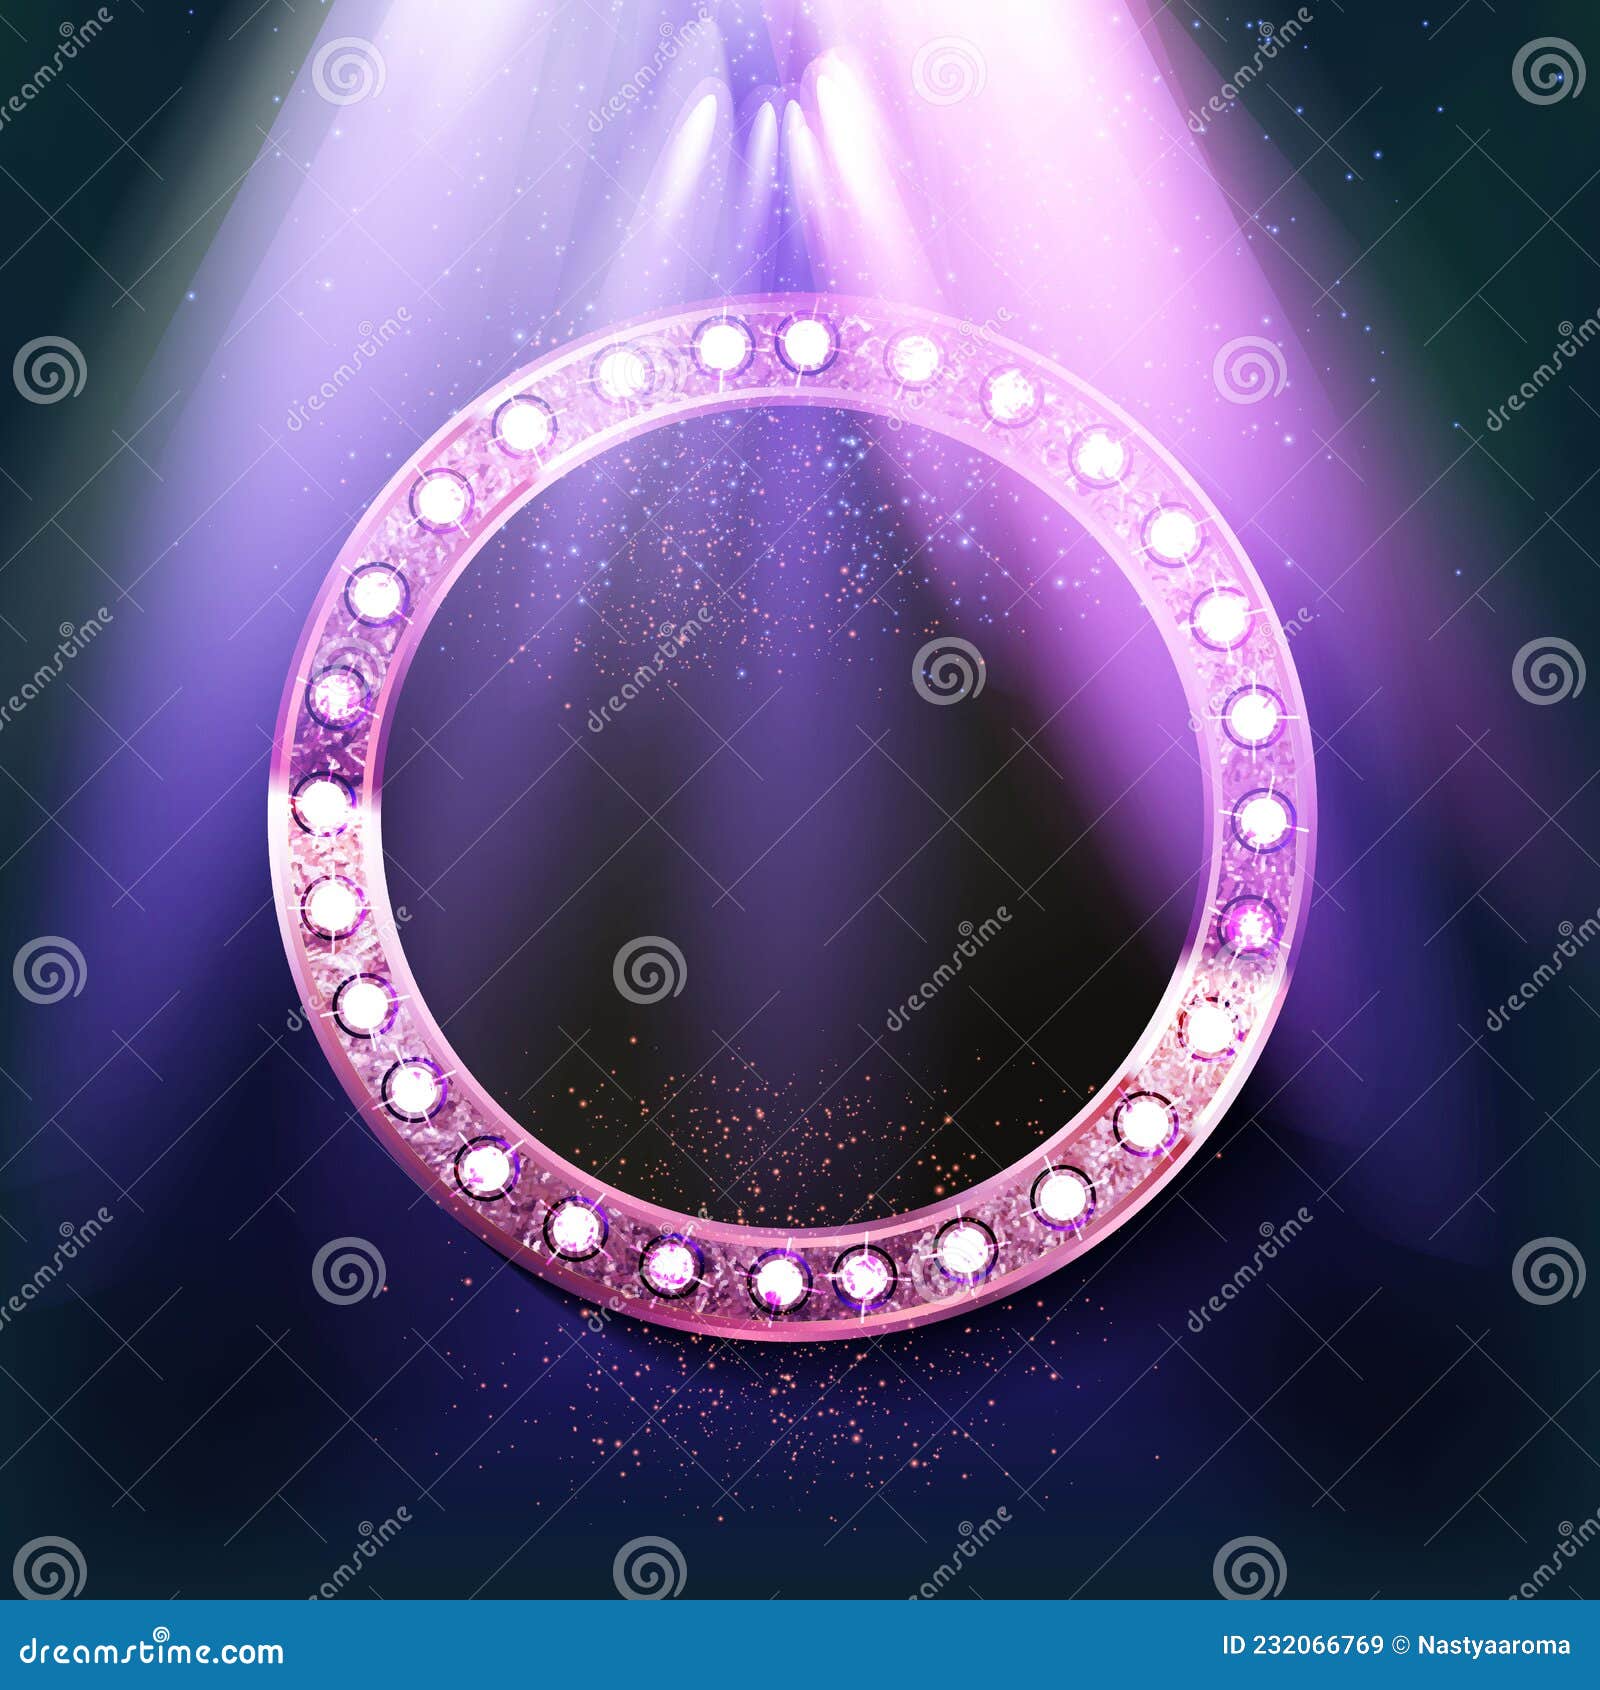 Ring Light Effect Hd Transparent, Beautiful Luxury Element Of Ring Light  Effect, Shiny, Circular, Empty PNG Image For Free Download